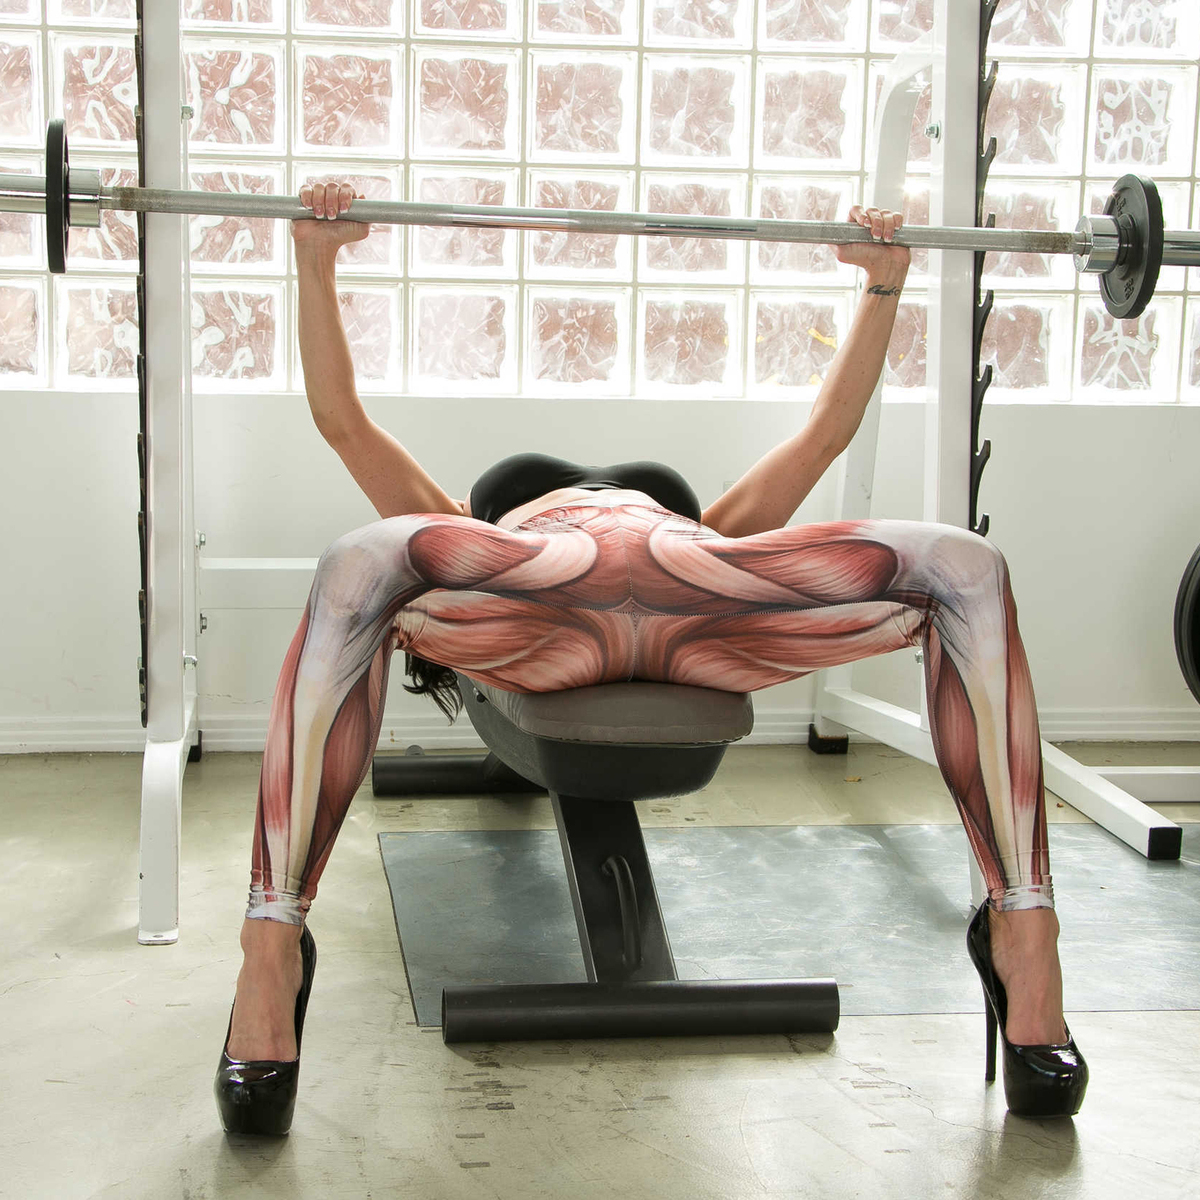 Kendra Lust Goes Deep at the Gym - picture 10